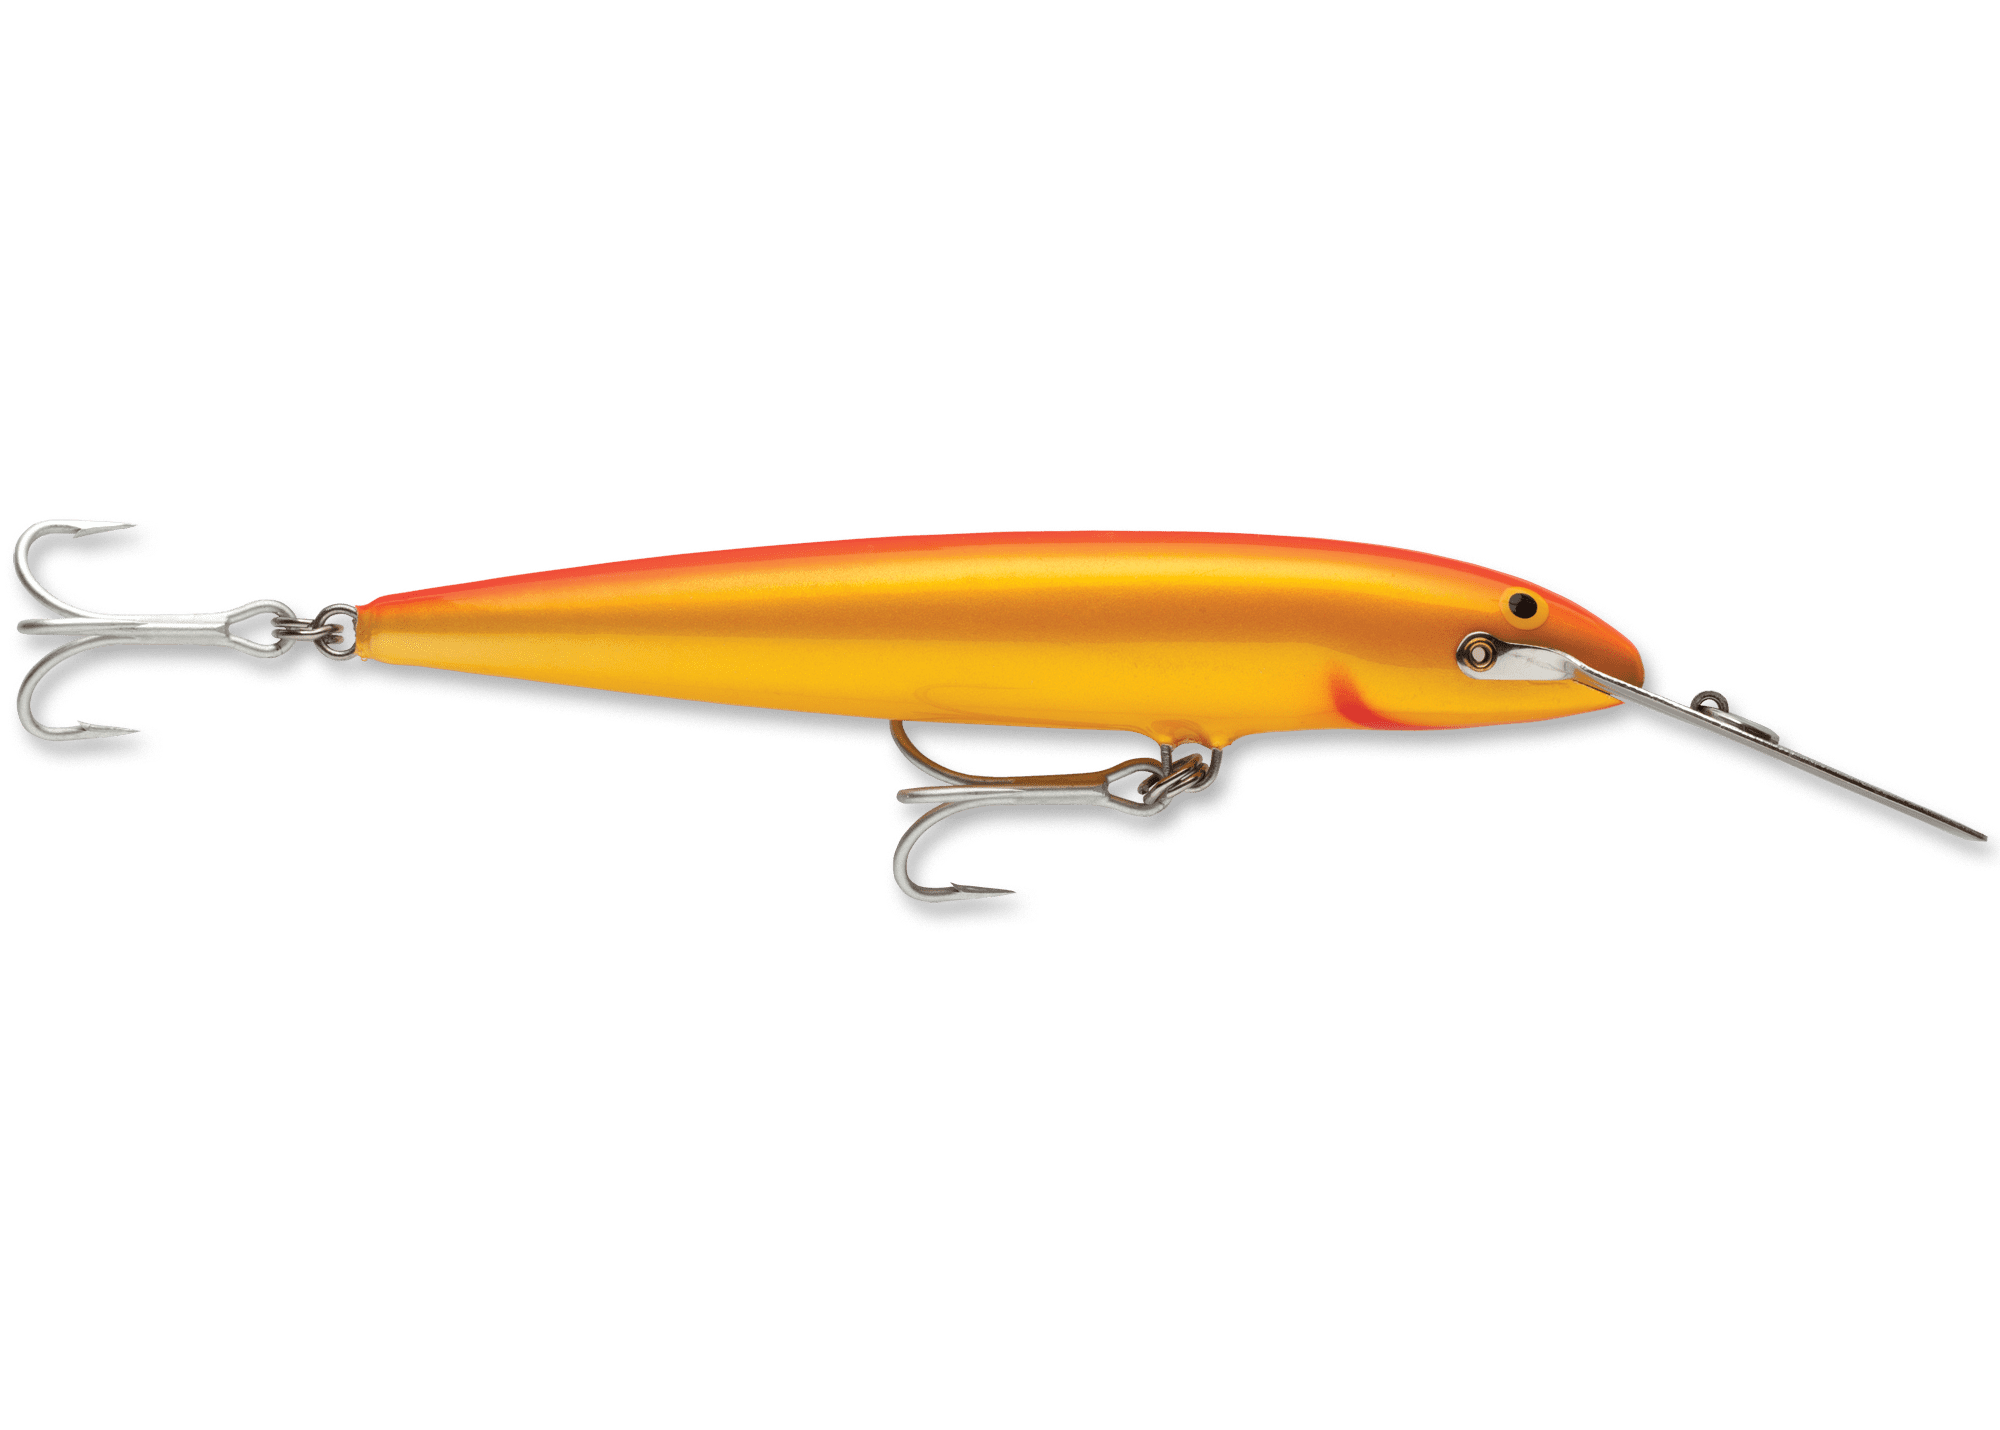 Rapala Magnum Fishing Lures & more. 4C - Lil Dusty Online Auctions - All  Estate Services, LLC